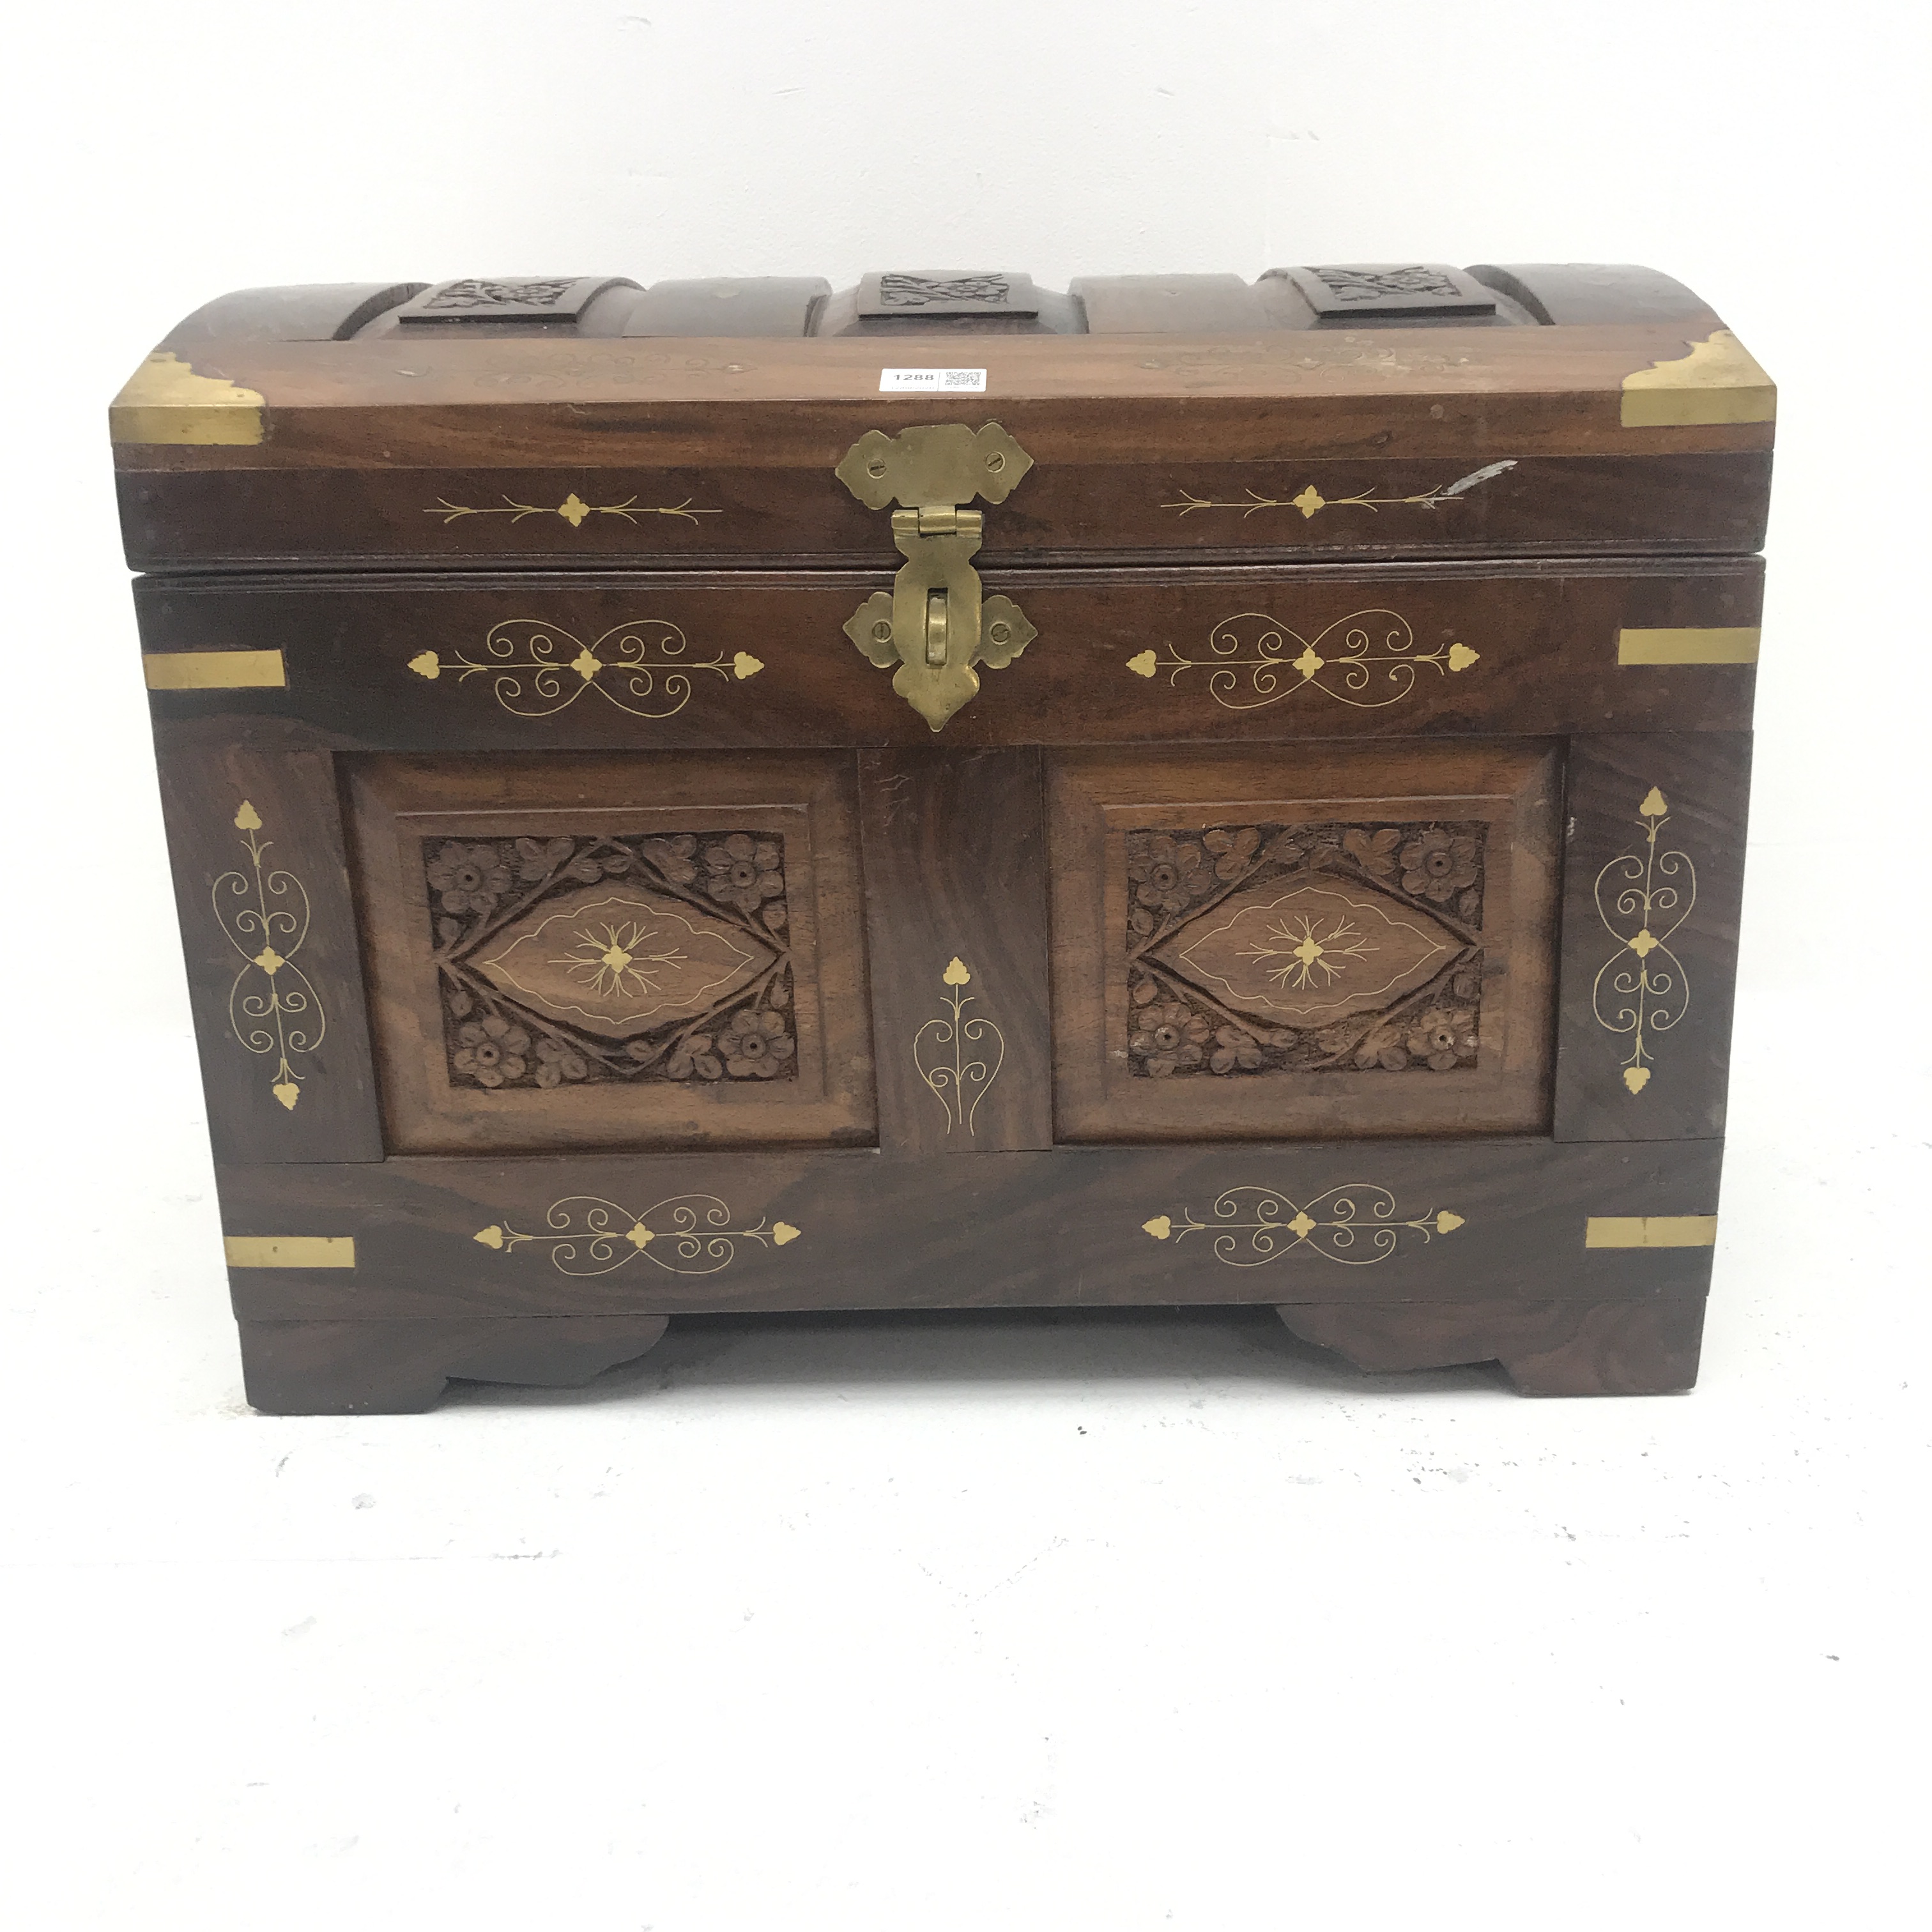 Eastern brass inlaid hardwood dome top trunk, hinged lid, W60cm, H45cm, D38cm - Image 6 of 8